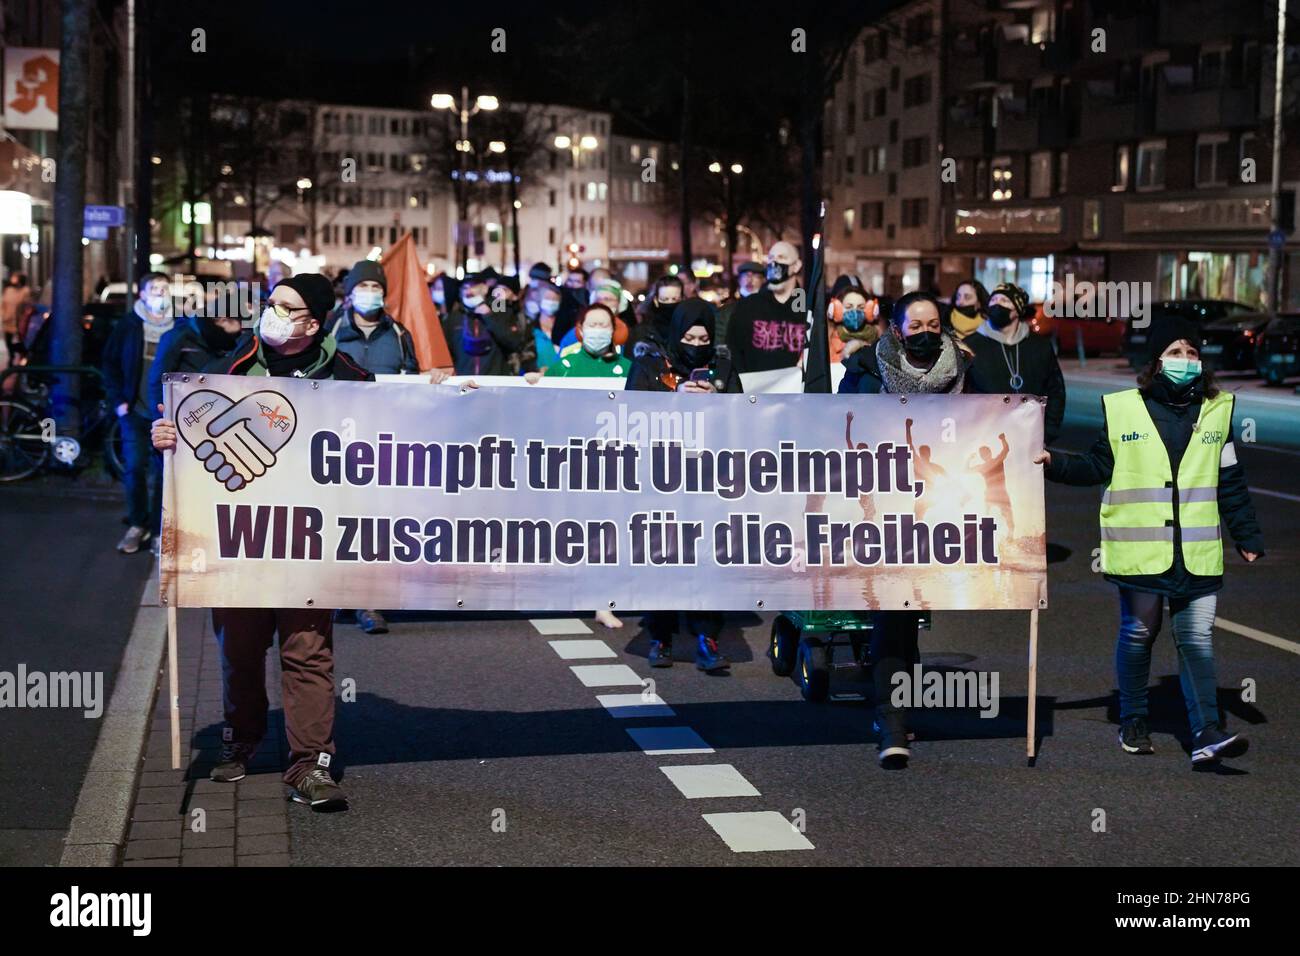 Dortmund, Germany, February 14th, 2022: Opponents of the corona protection measures march through the city center of Dortmund on Monday evening at an approved demonstration.   ---   Dortmund, 14.2.2022: Gegner der Corona-Schutzmaßnahmen ziehen am Montagabend bei einer genehmigten Demonstration durch die Dortmunder Innenstadt. Stock Photo